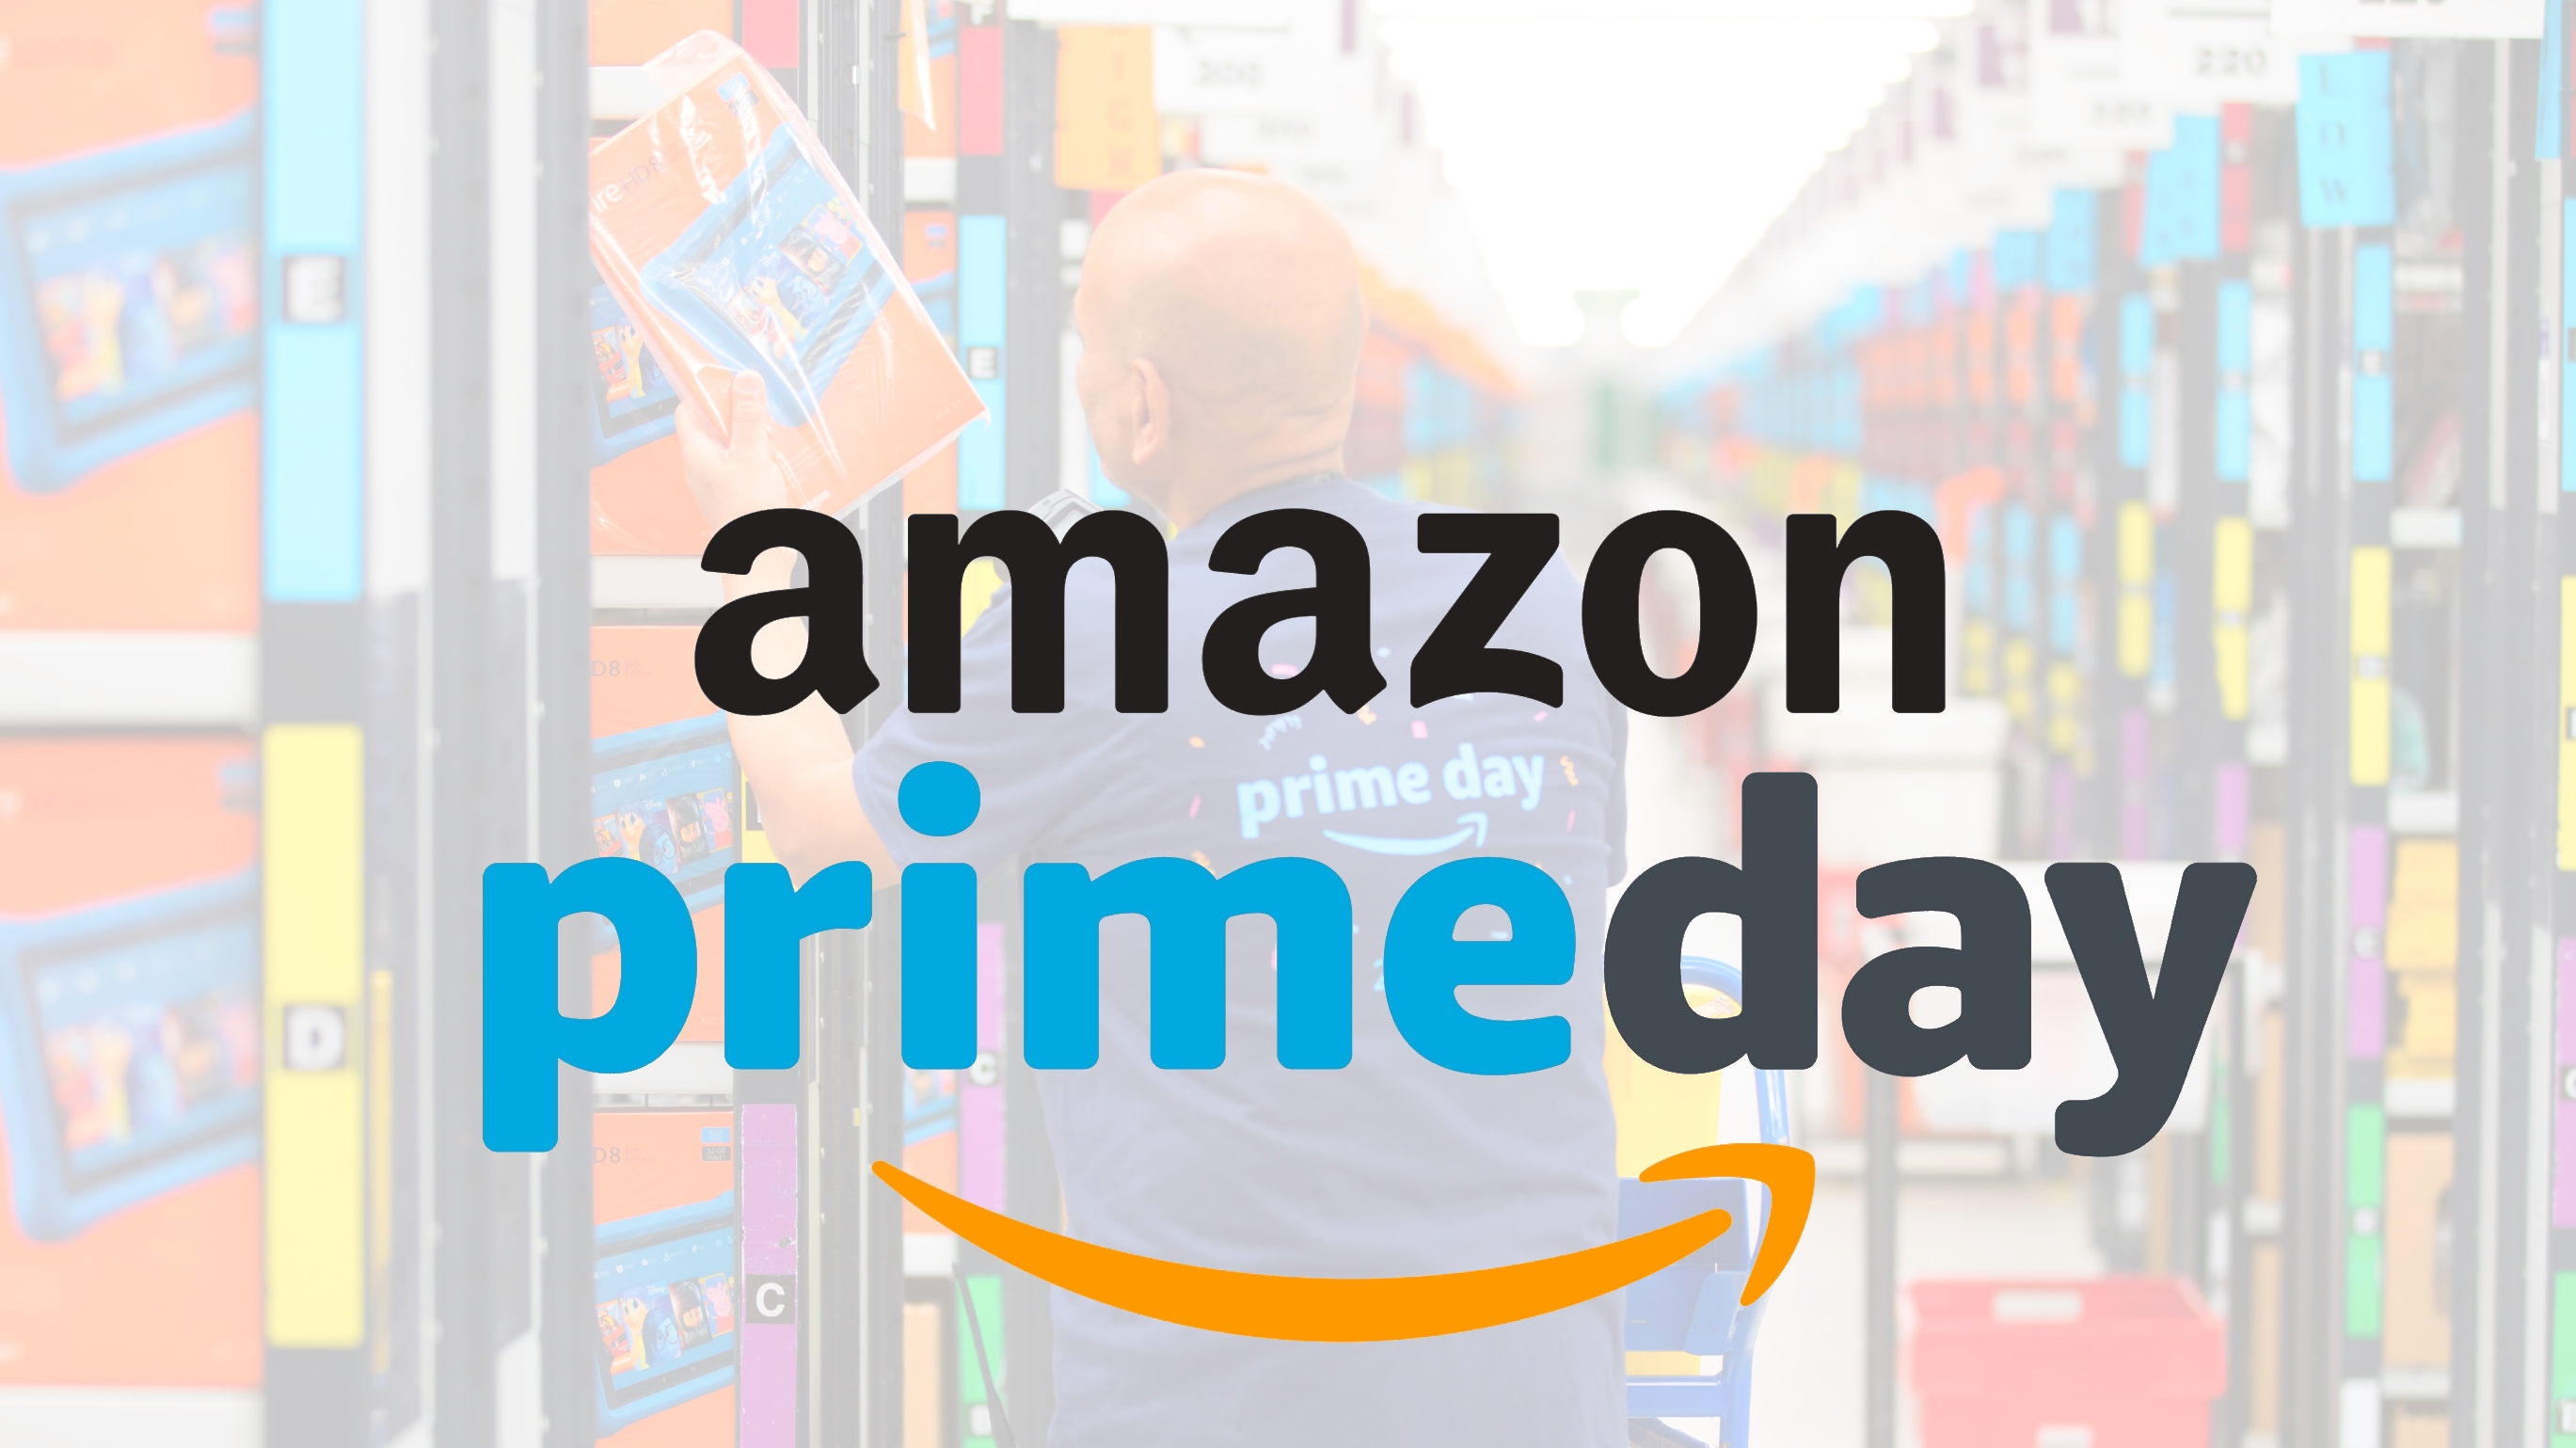 Best Amazon Prime Day deals 2020 — the best deals you can get now Tom